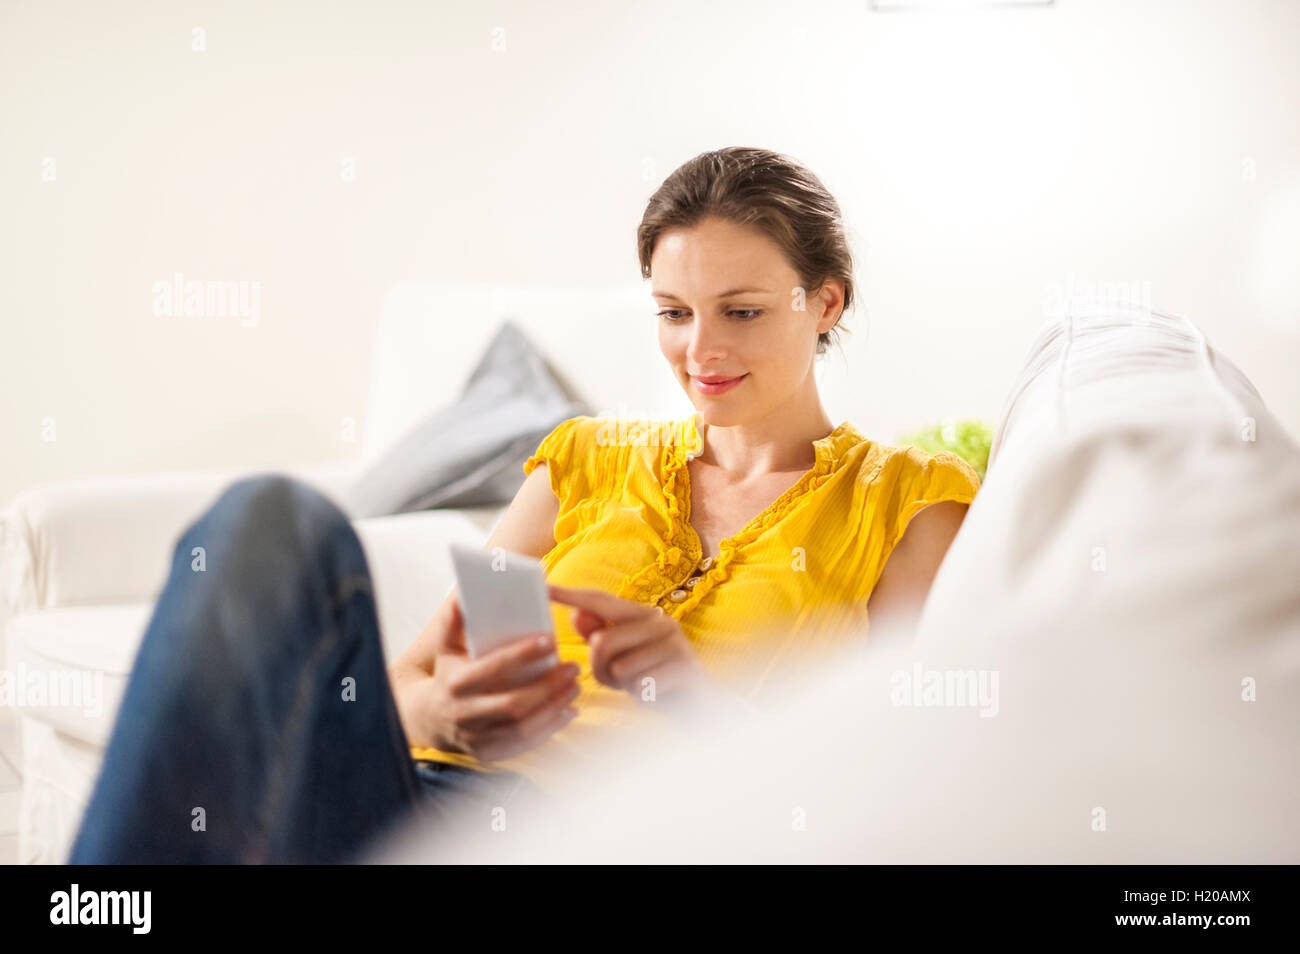 Woman sitting on couch, reading text messages on smart phone Stock Photo